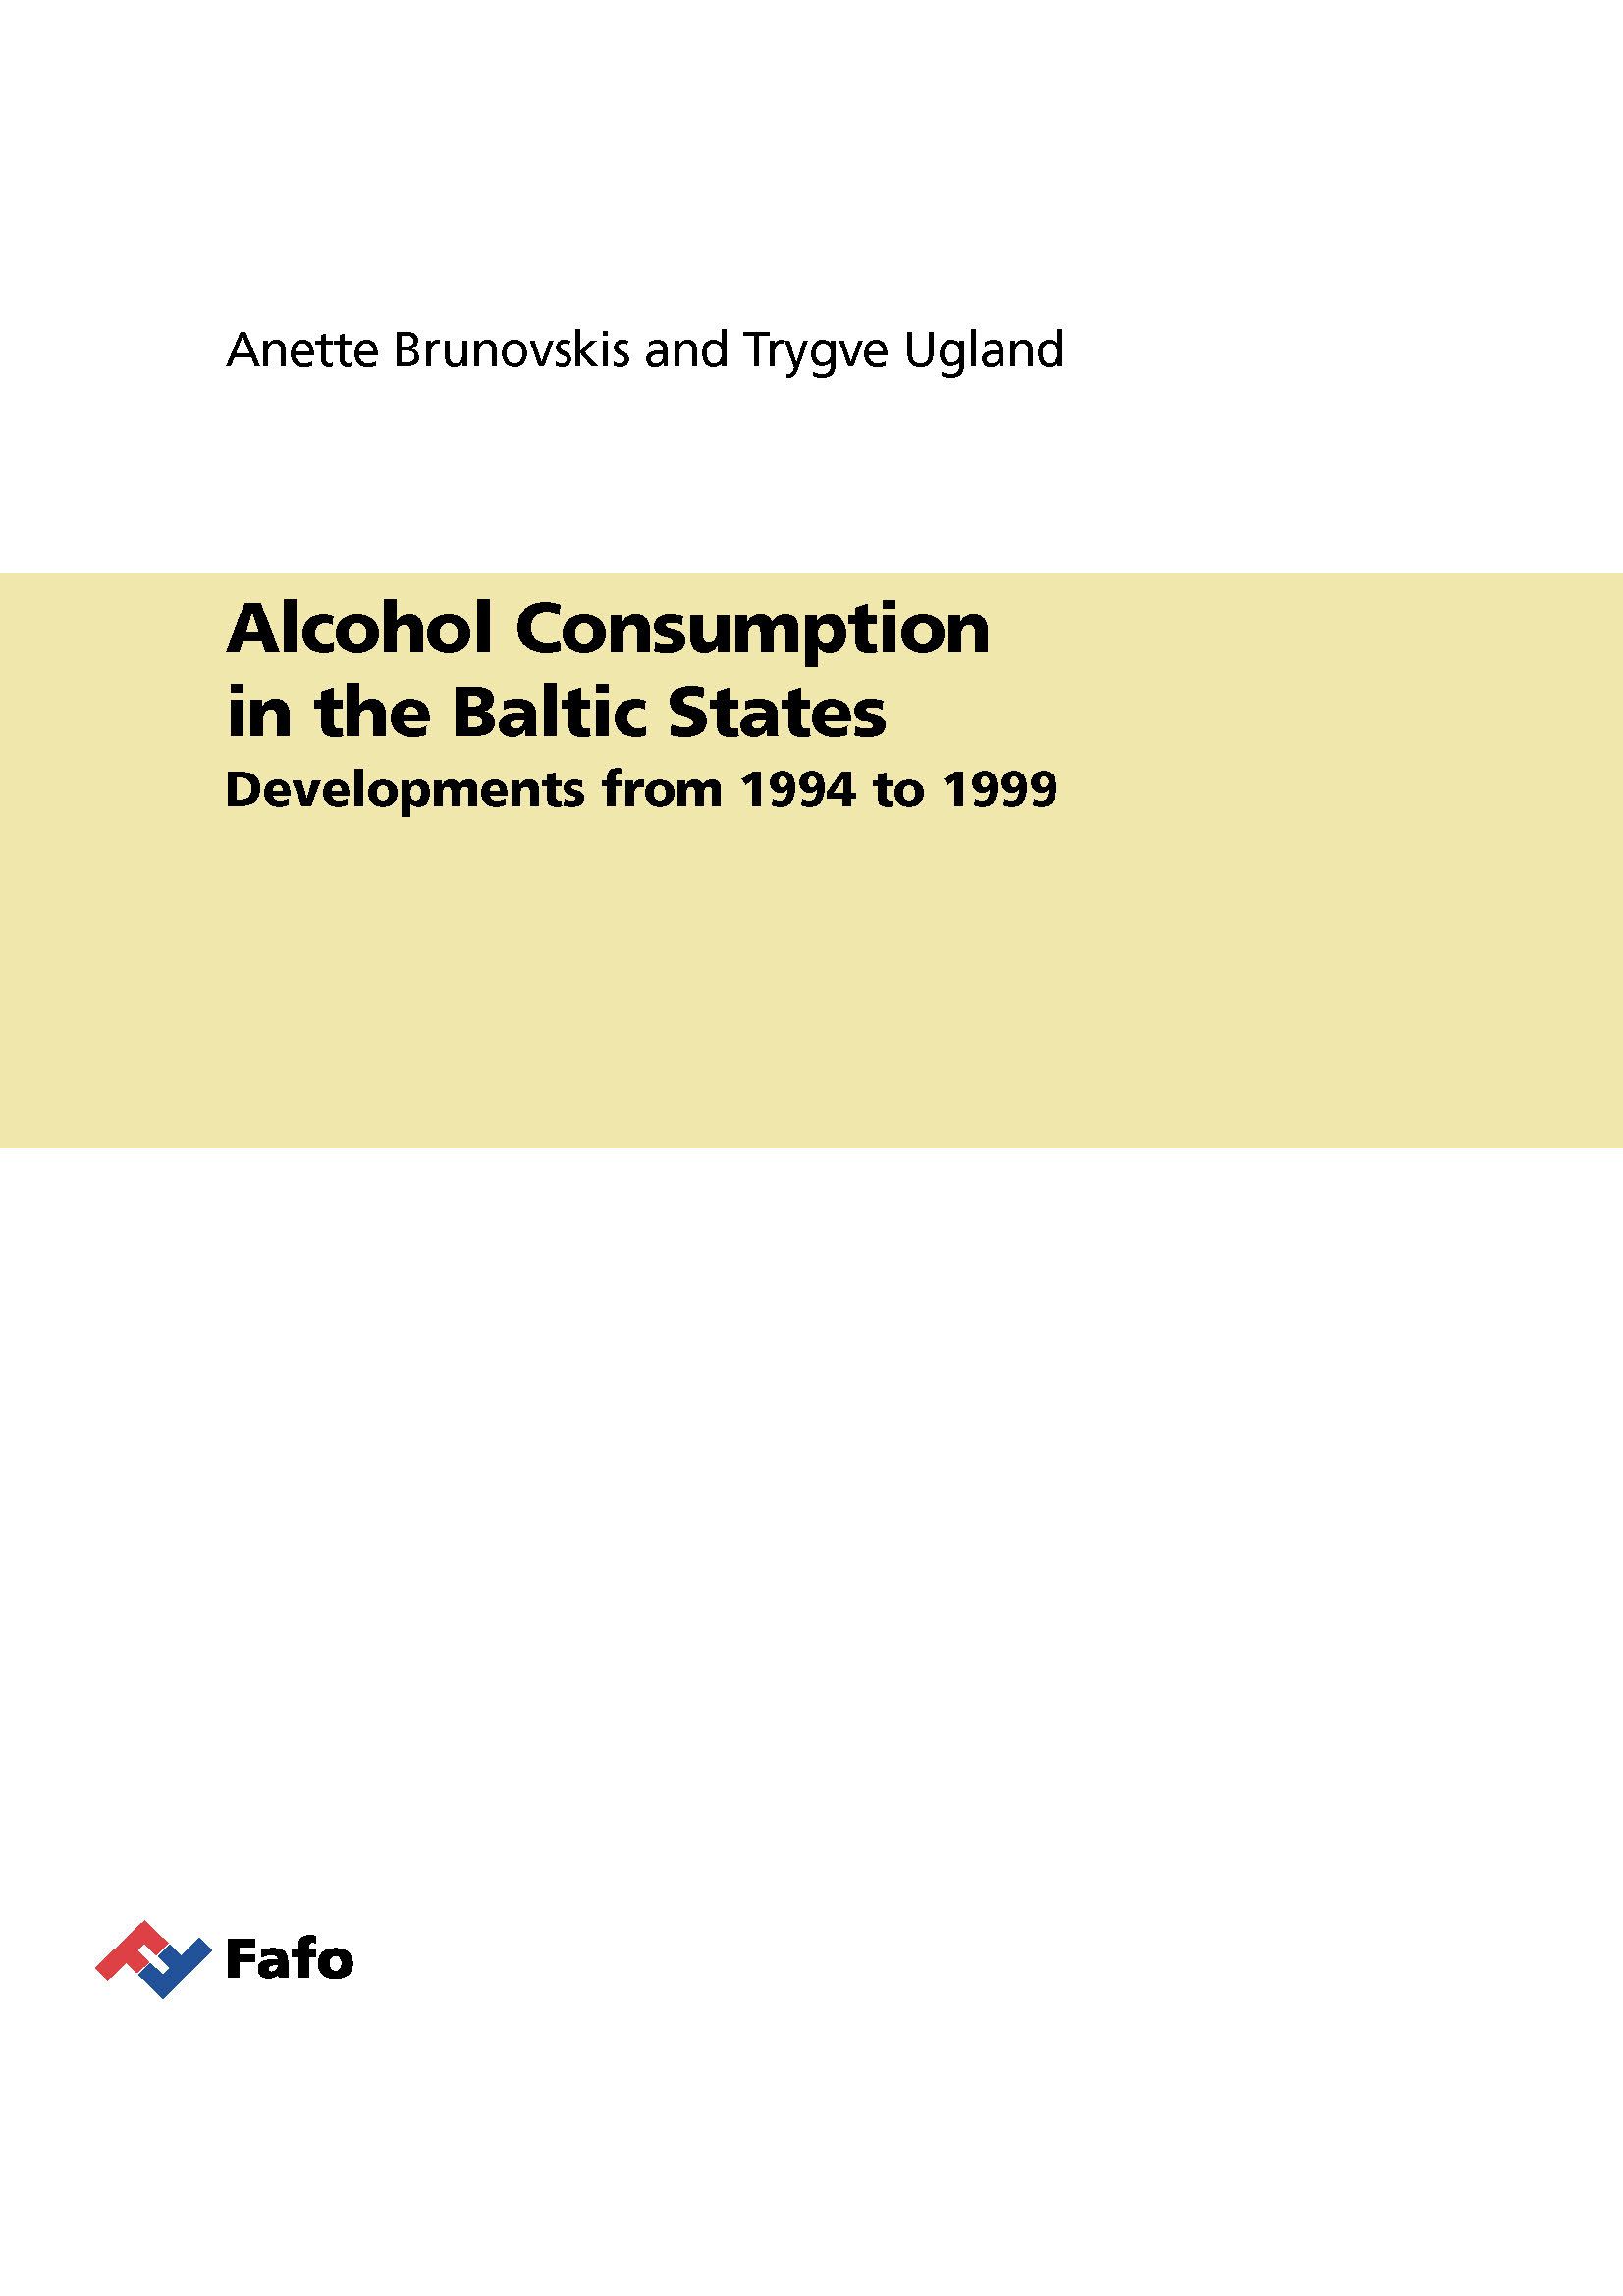 Alcohol Consumption in the Baltic States